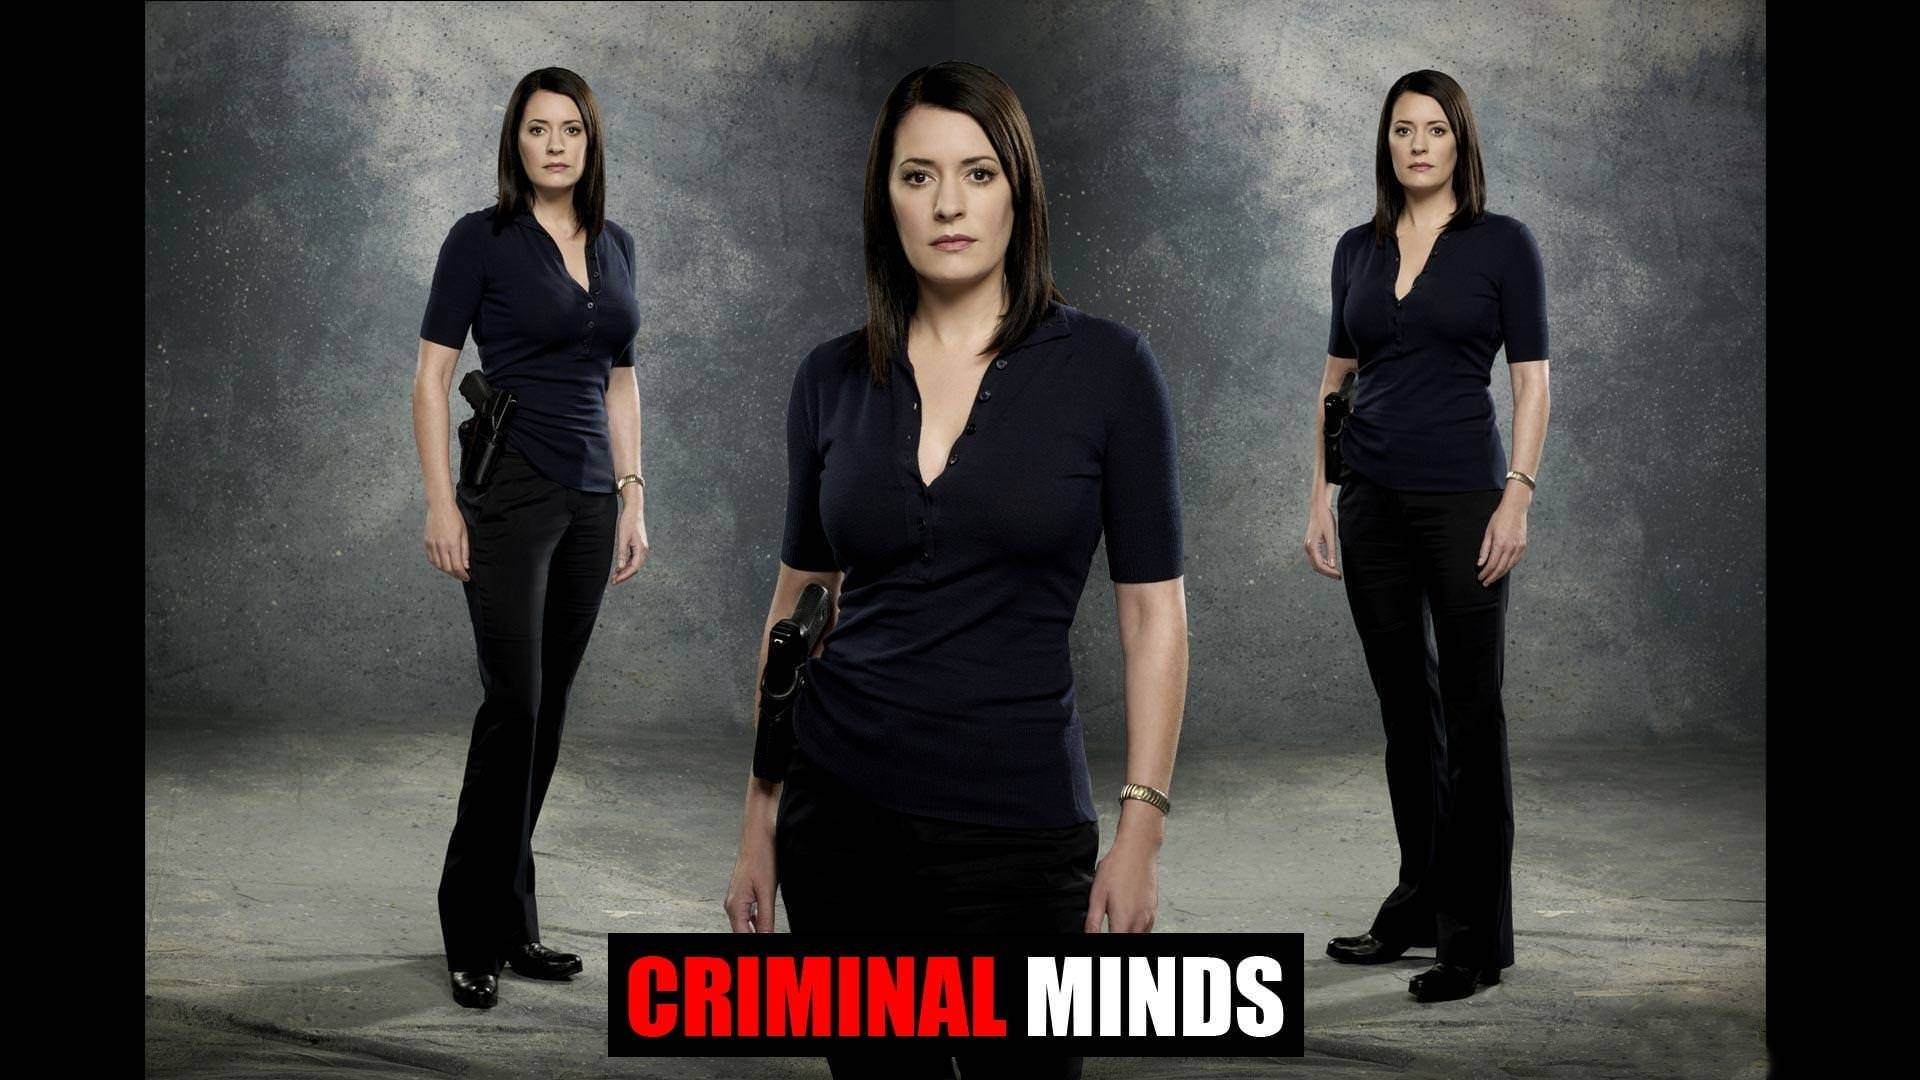 Emily Prentiss From Criminal Minds Show